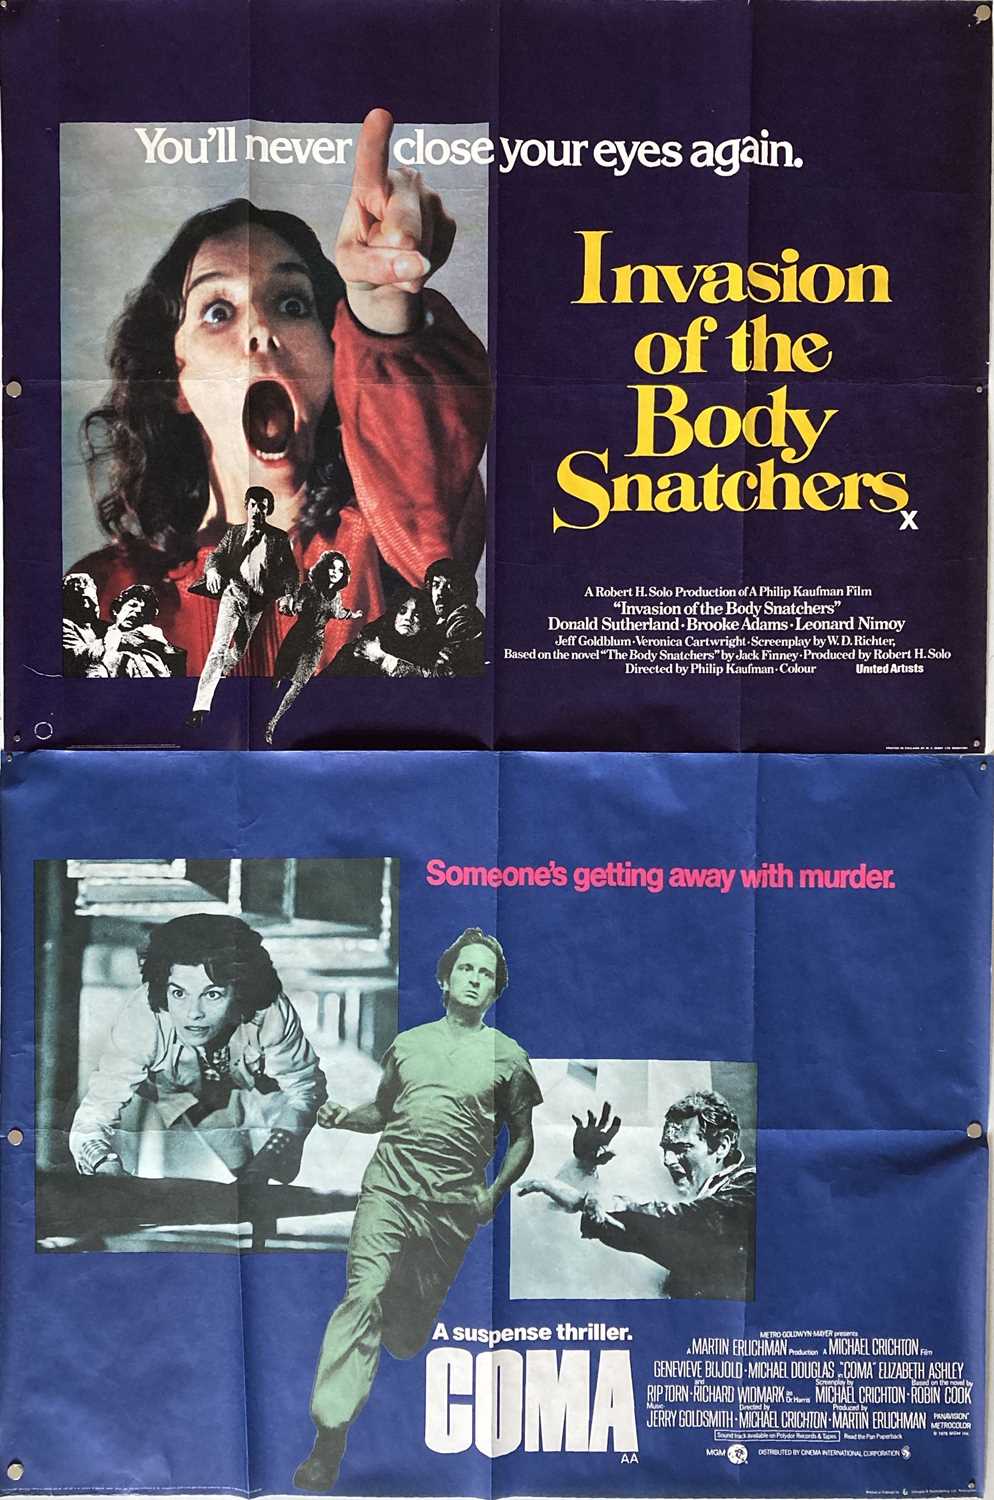 Lot 168 - UK QUAD POSTERS - INVASION OF THE BODY SNATCHERS AND MORE.